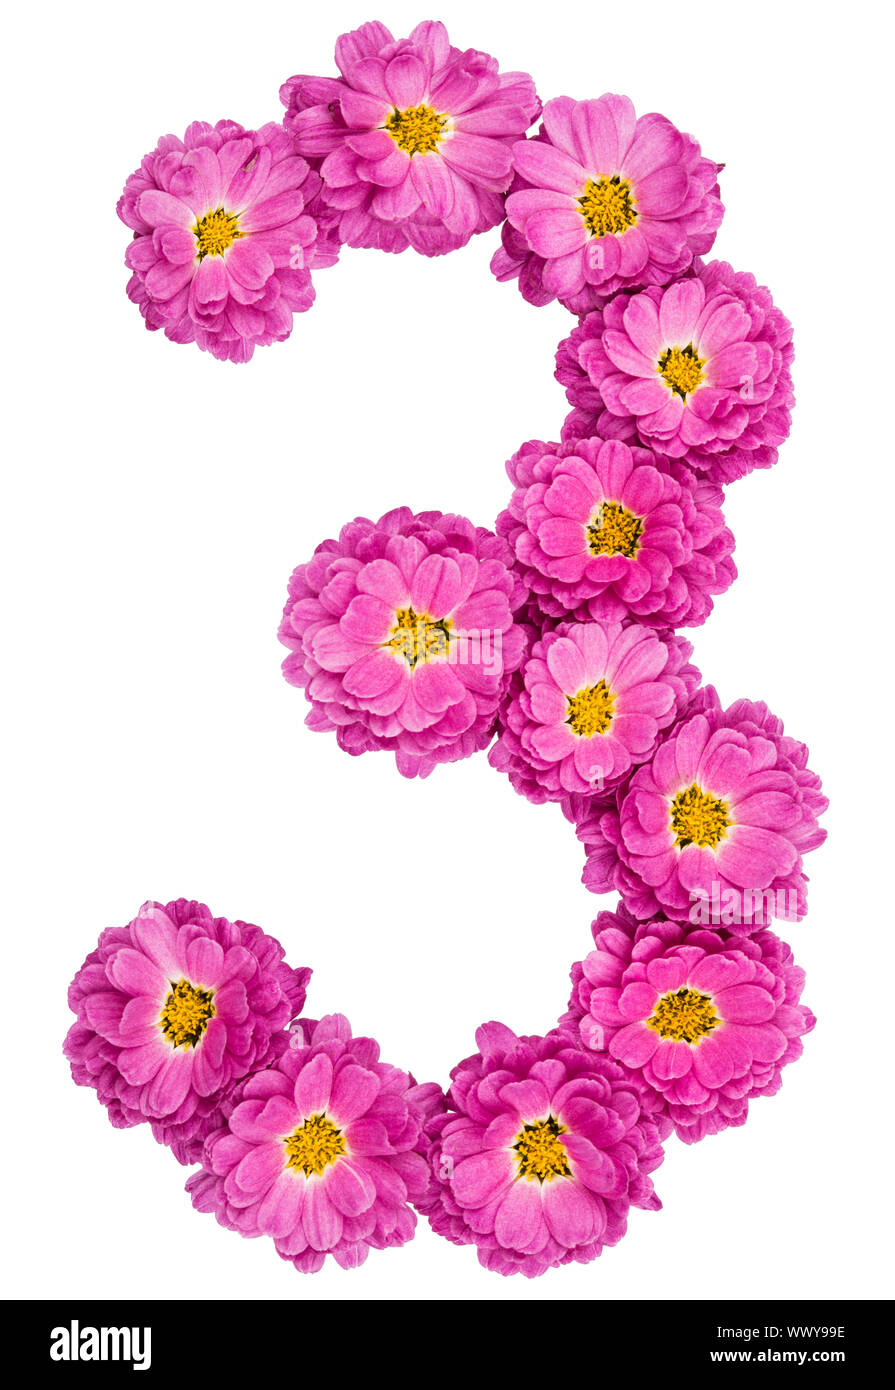 Arabic numeral 3, three, from flowers of chrysanthemum, isolated on white background Stock Photo